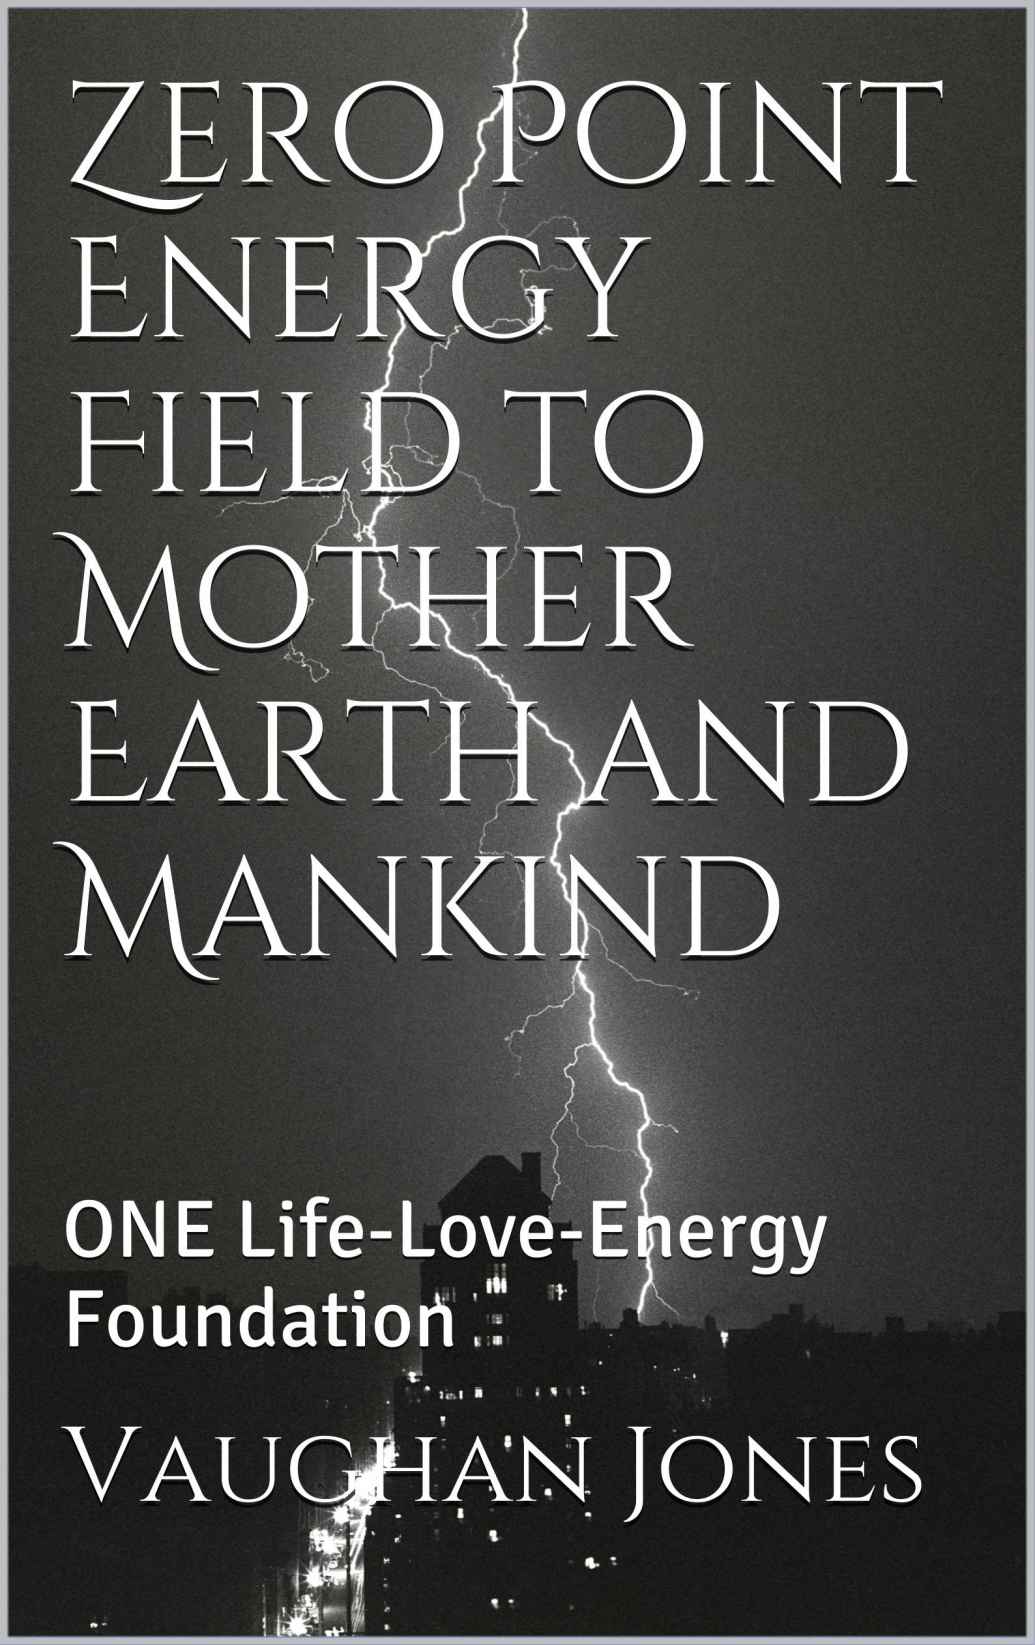 Zero Point Energy Field to Mother Earth and Mankind: ONE Life-Love-Energy Foundation